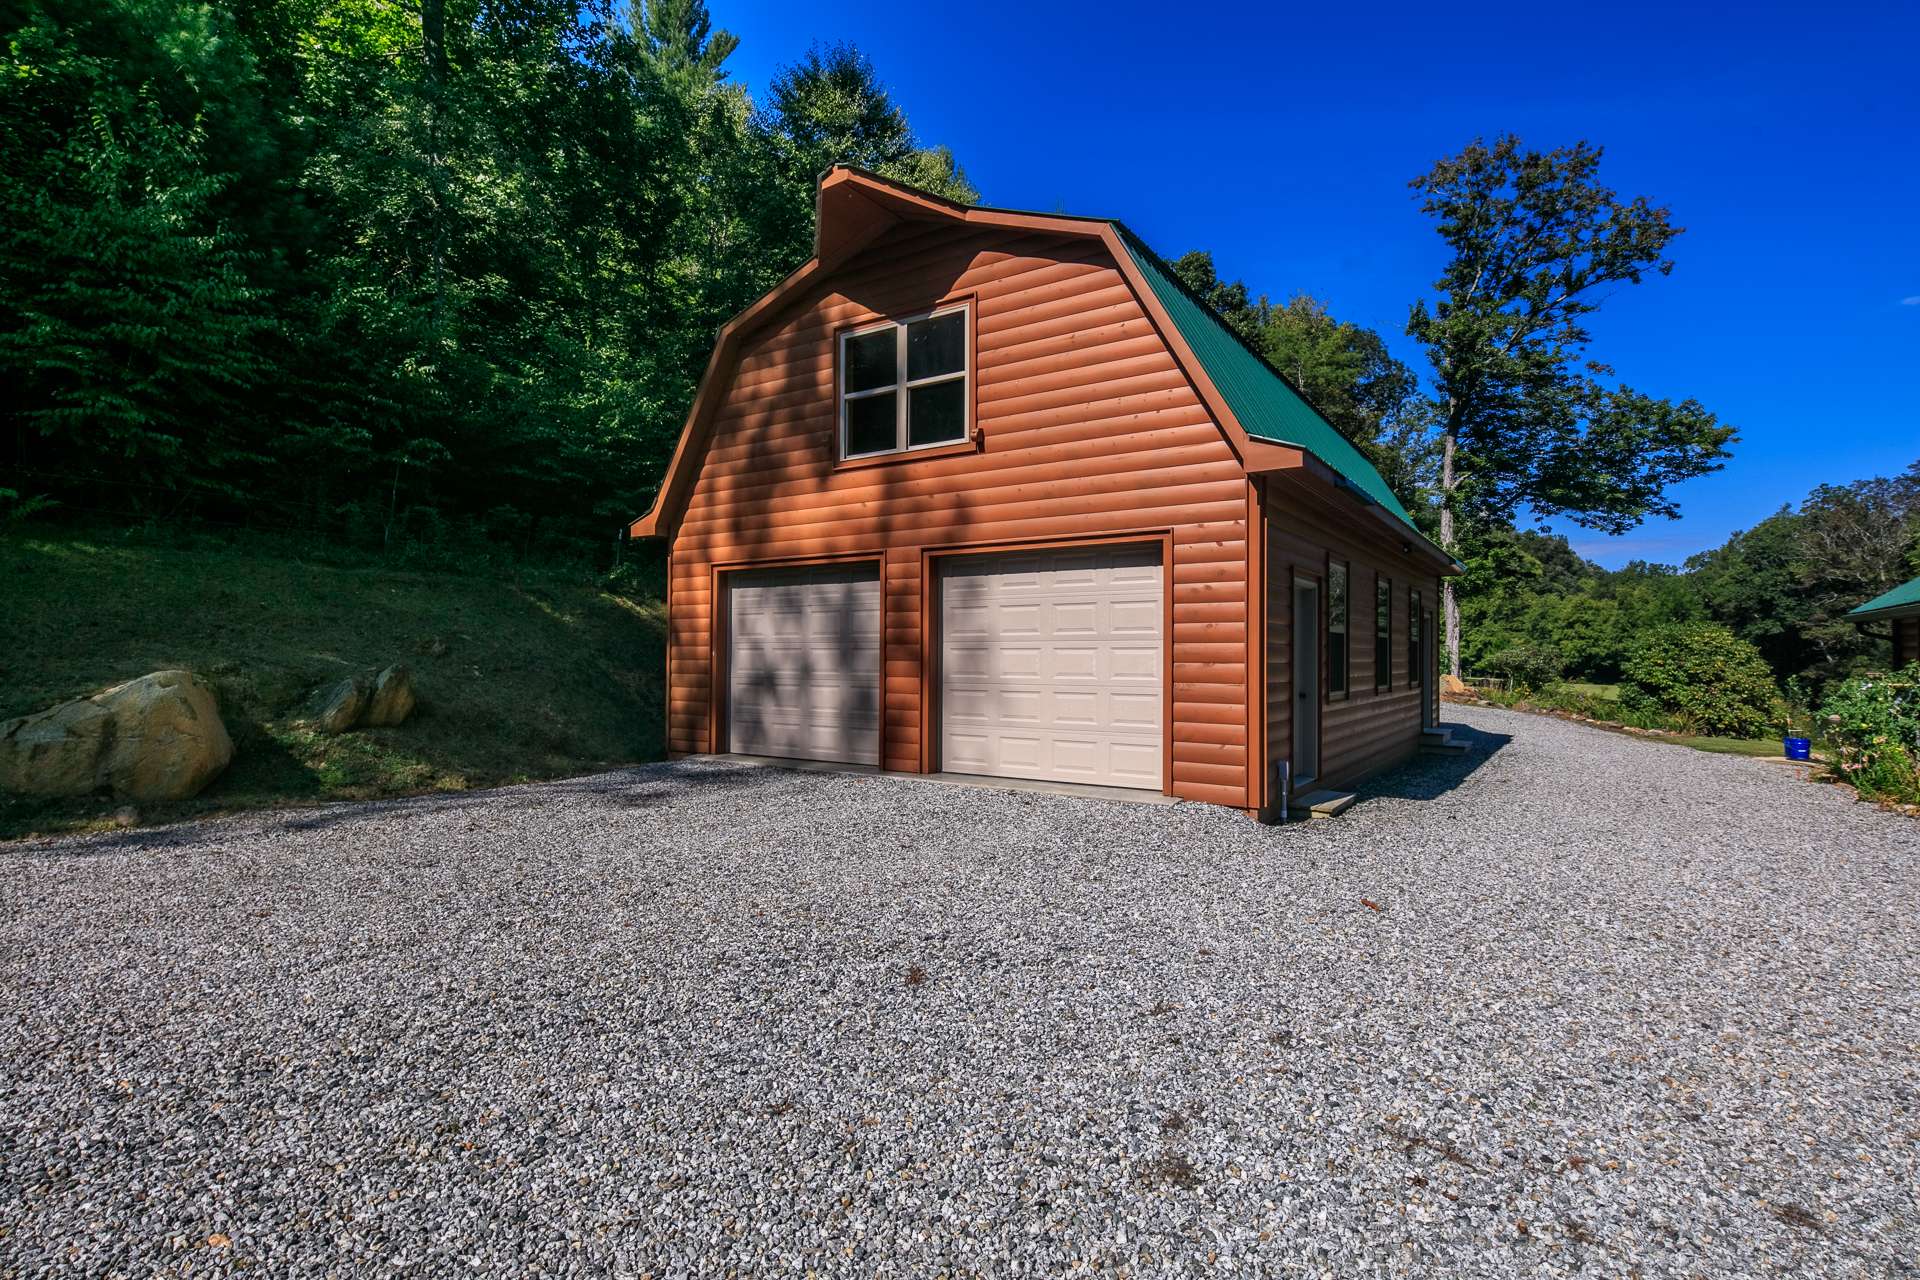 You will appreciate this detached 2-car garage with extended covered storage space for all of your lawn, gardening, and recreational equipment.